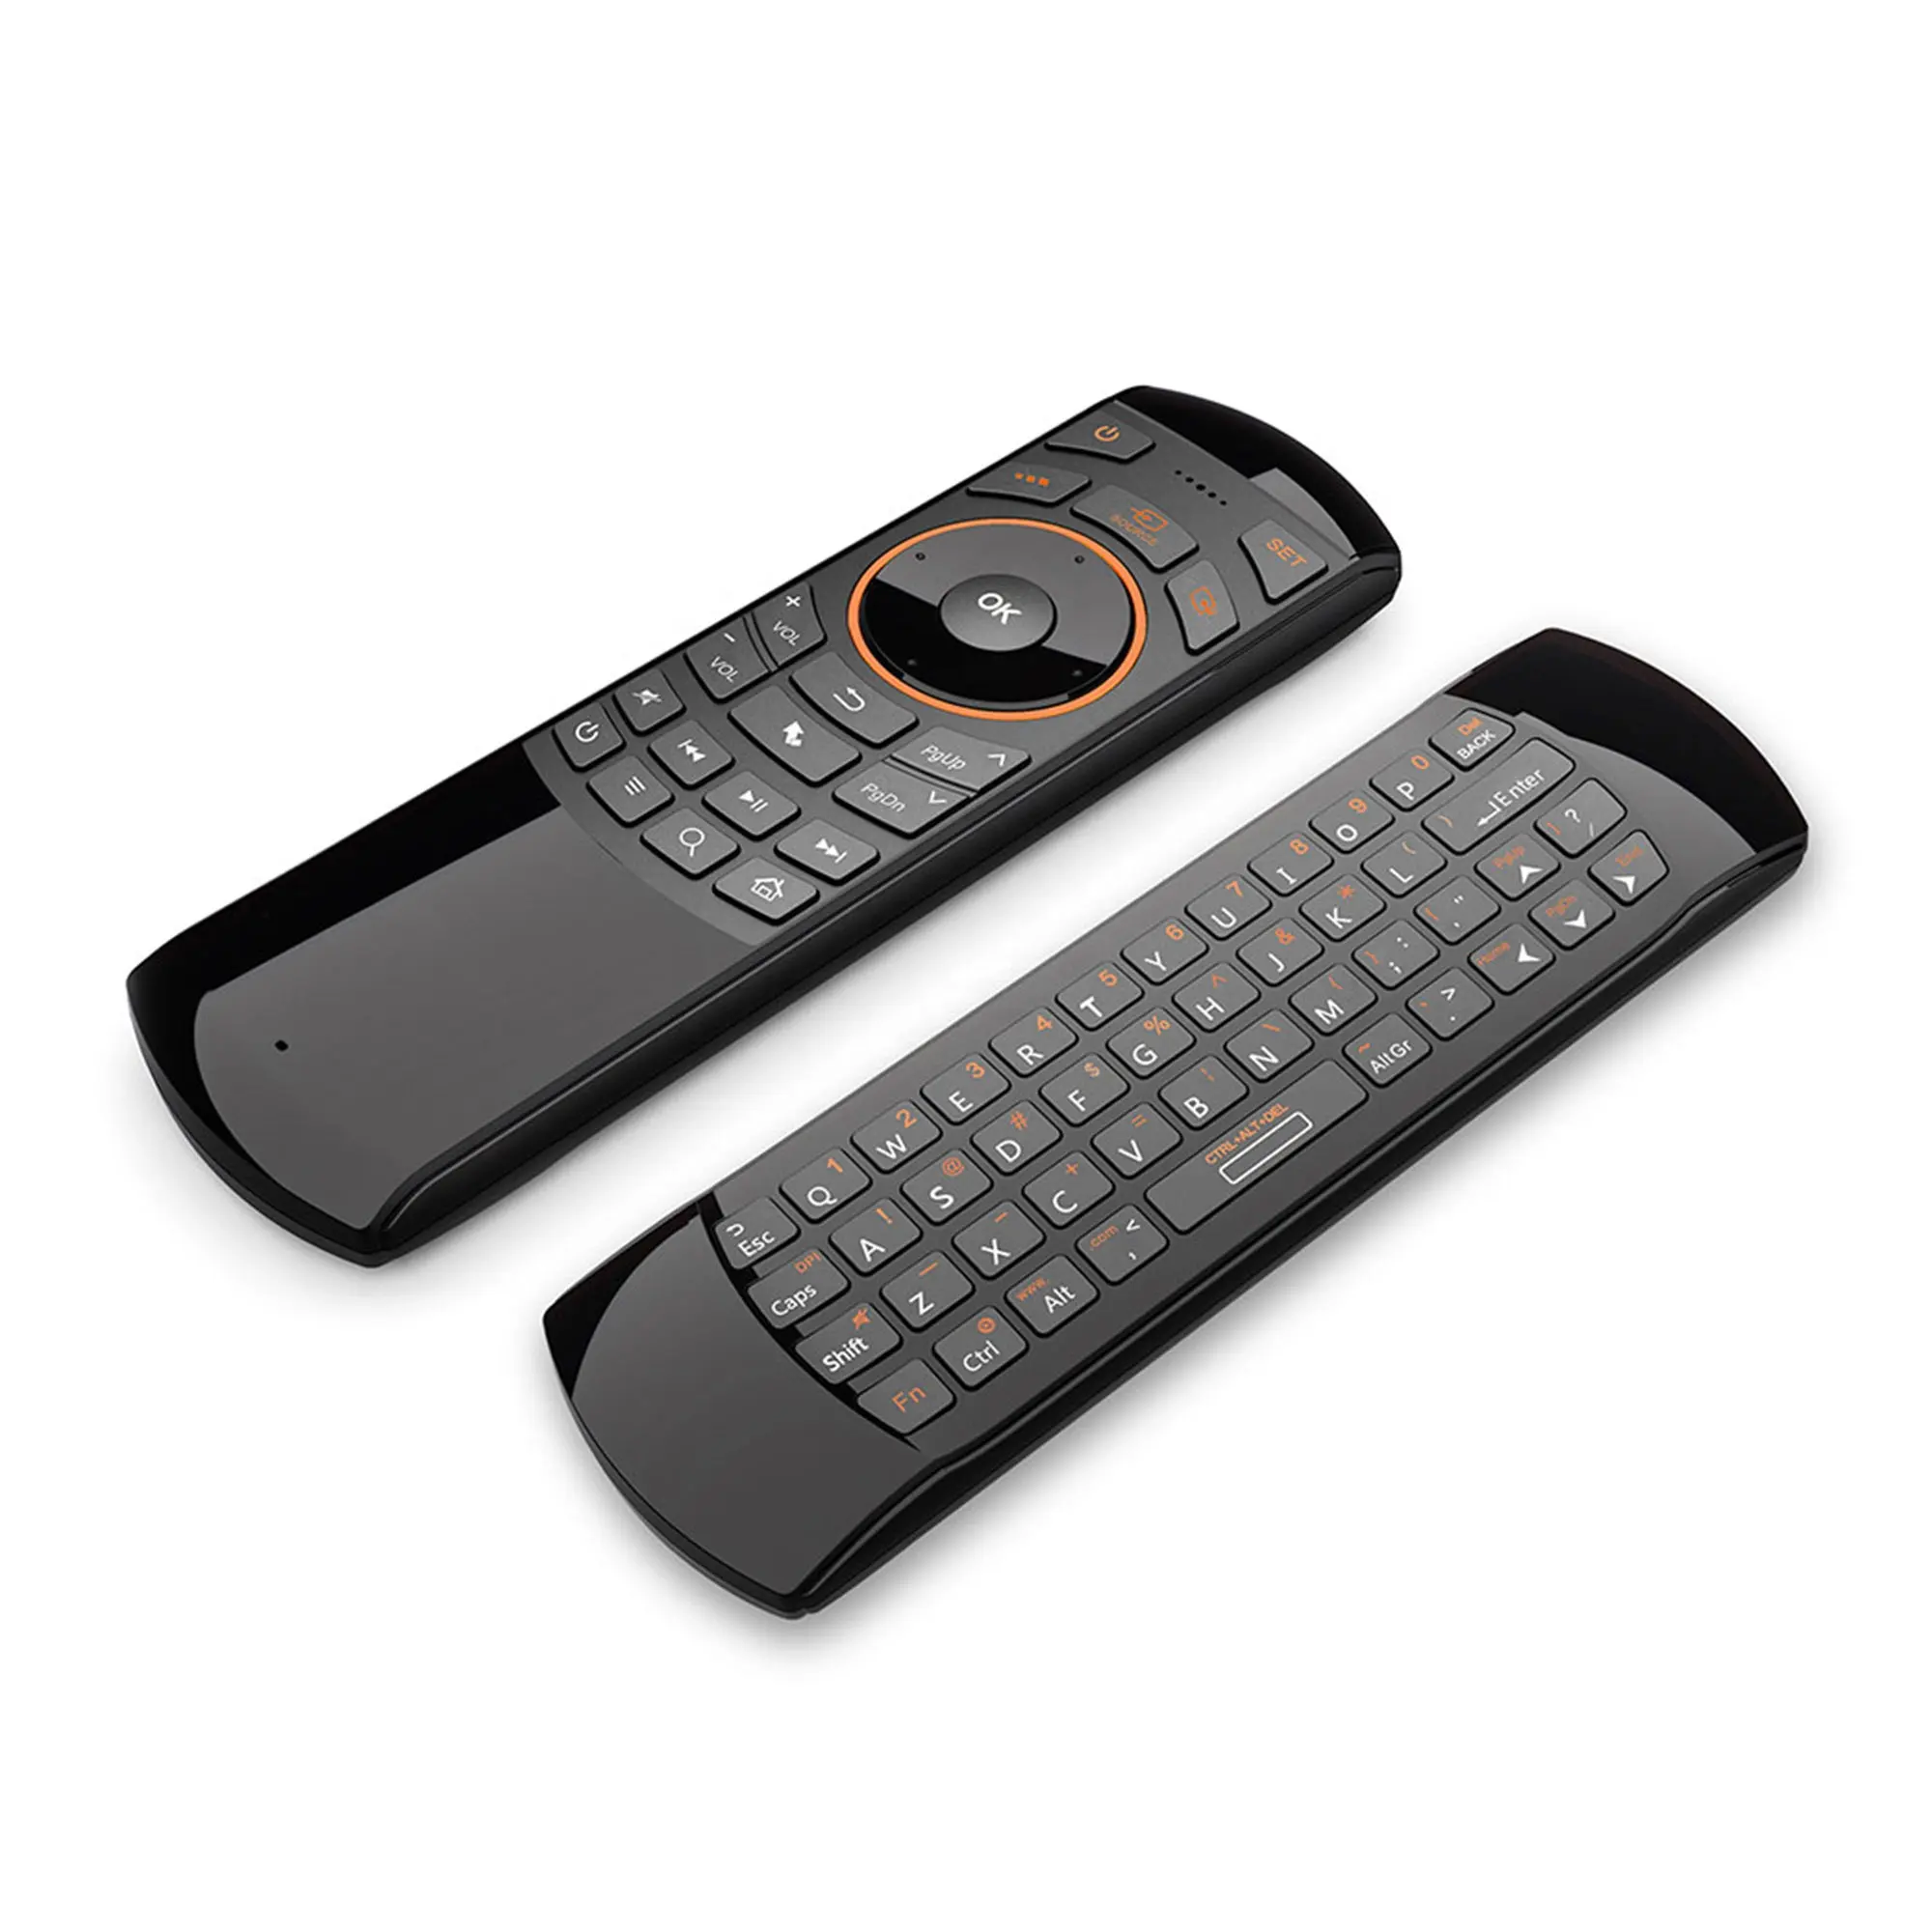 2.4G Hz Wireless QWERTY Keyboard + Air Mouse + Remote Control untuk Windows/MAC OS/Linux/Android